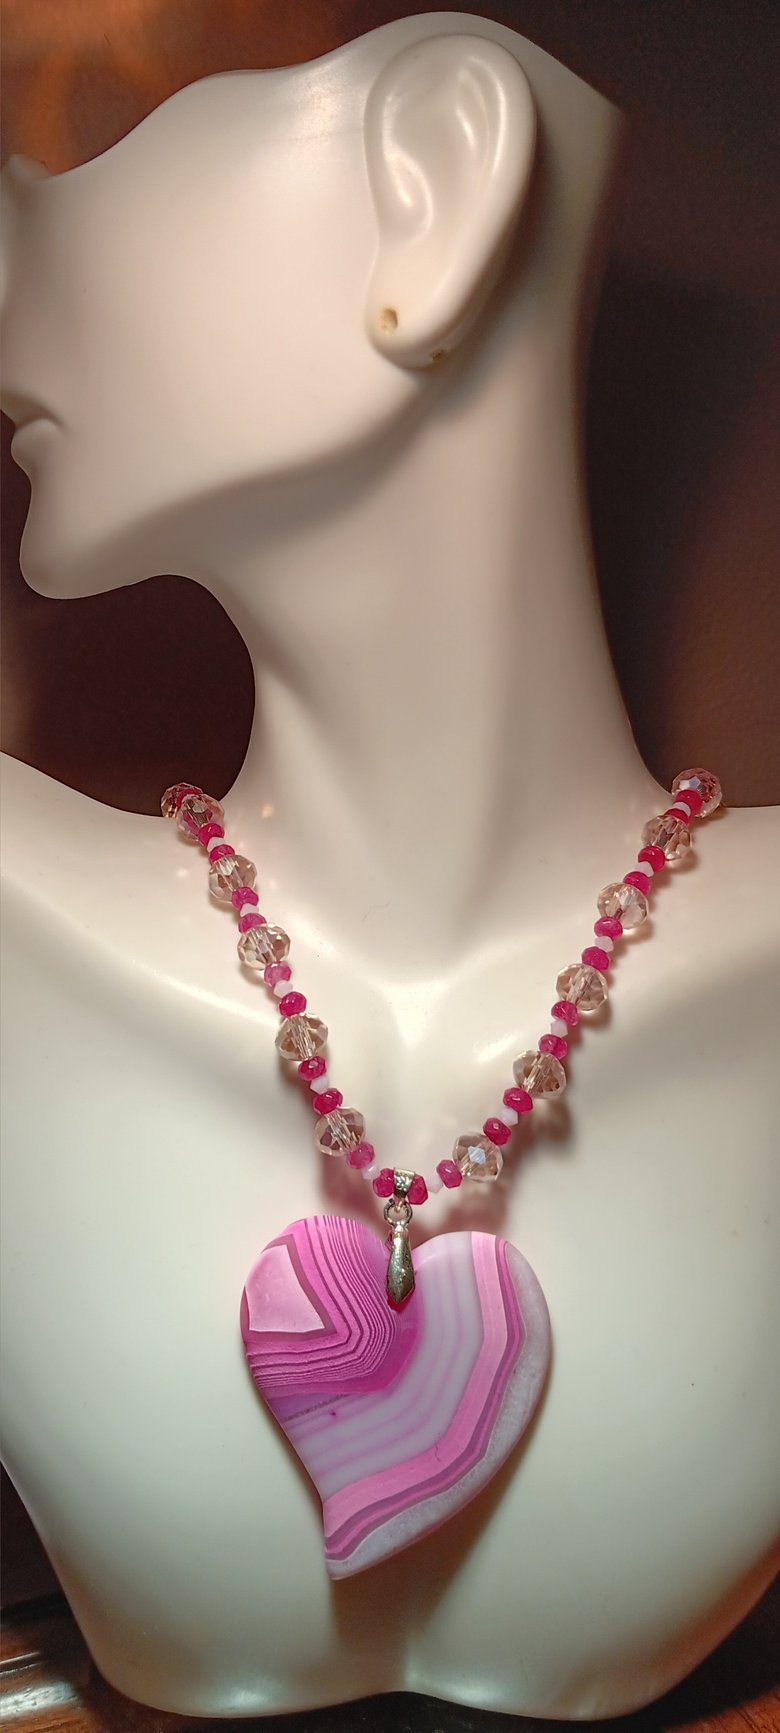 Image of STRIPED PINK AGATE HEART PENDANT NECKLACE